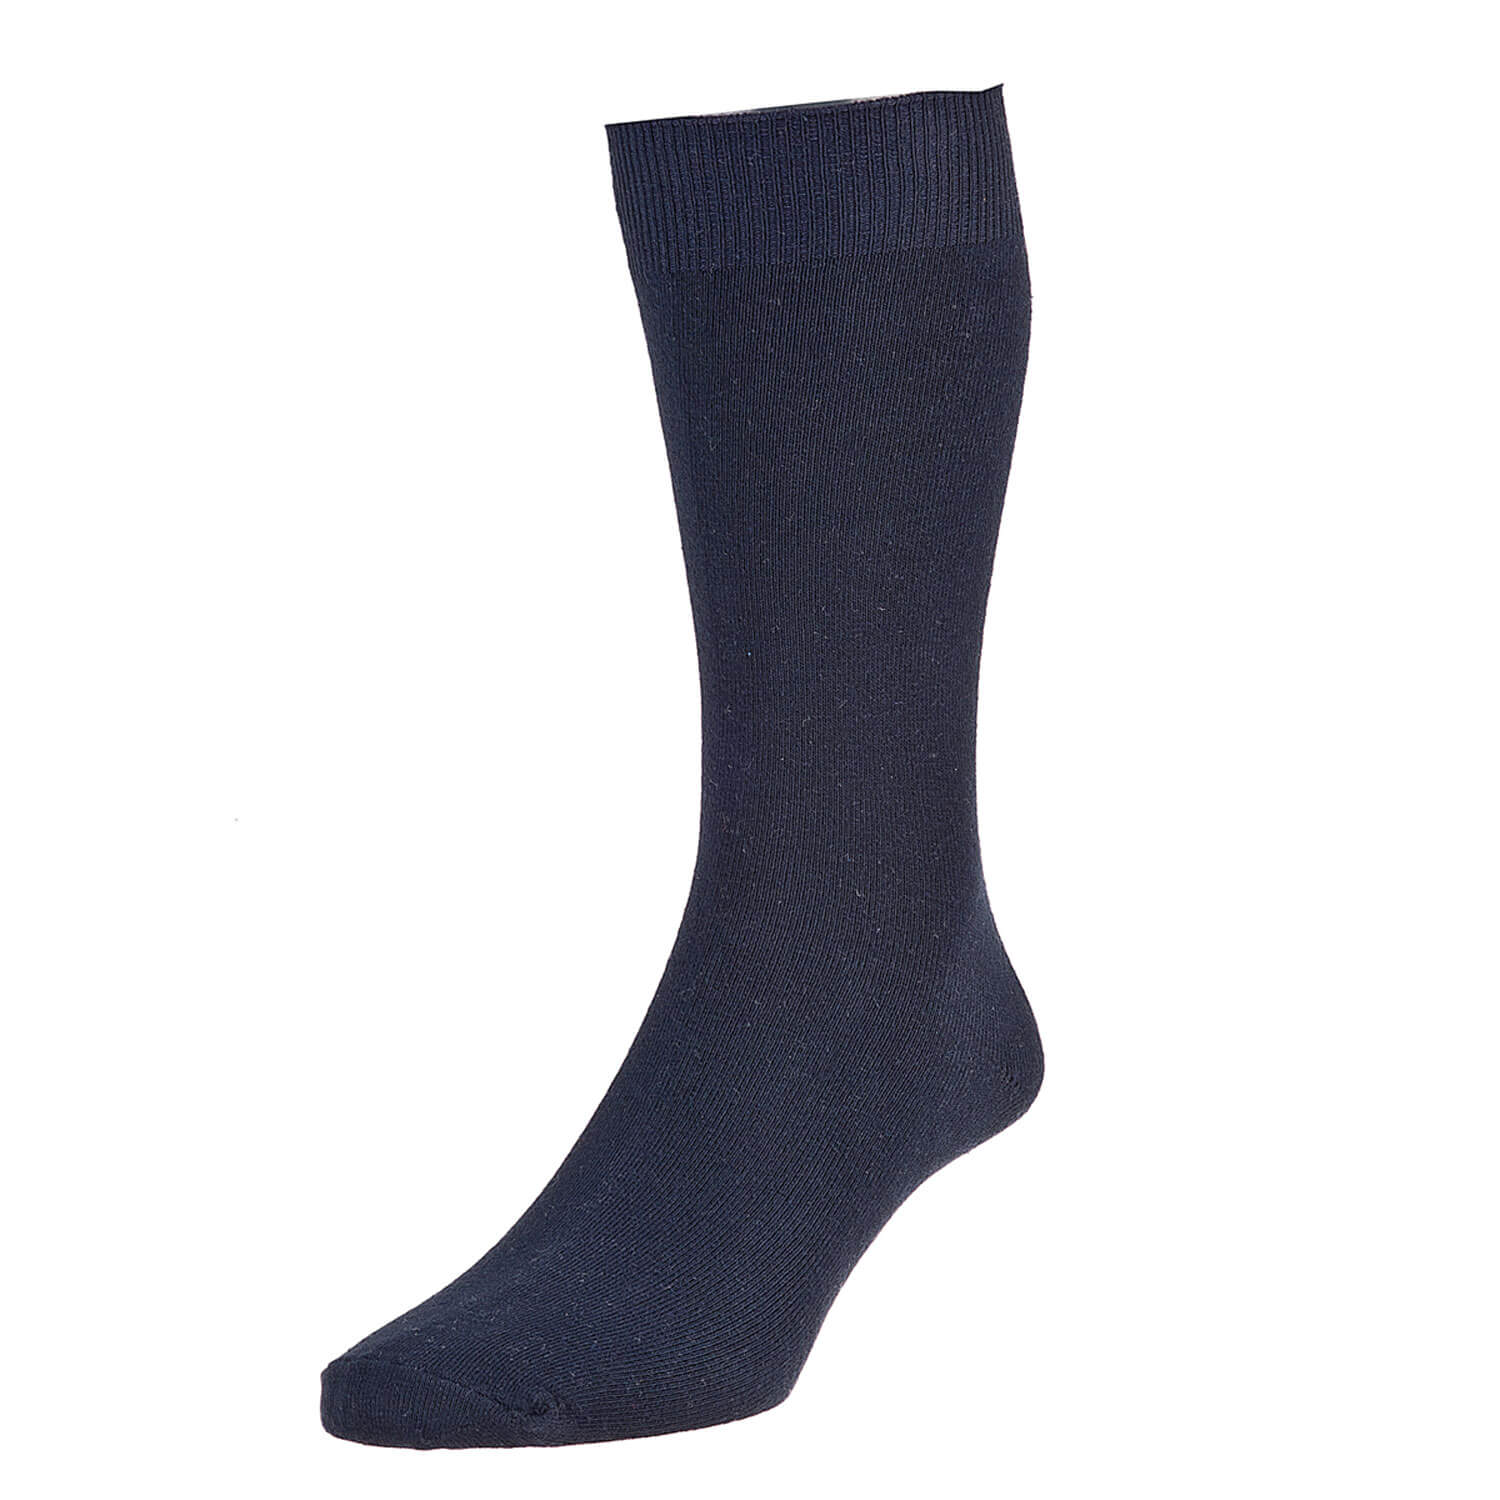 Hj Hall Executive Cotton Socks 3 Piece - Navy 1 Shaws Department Stores